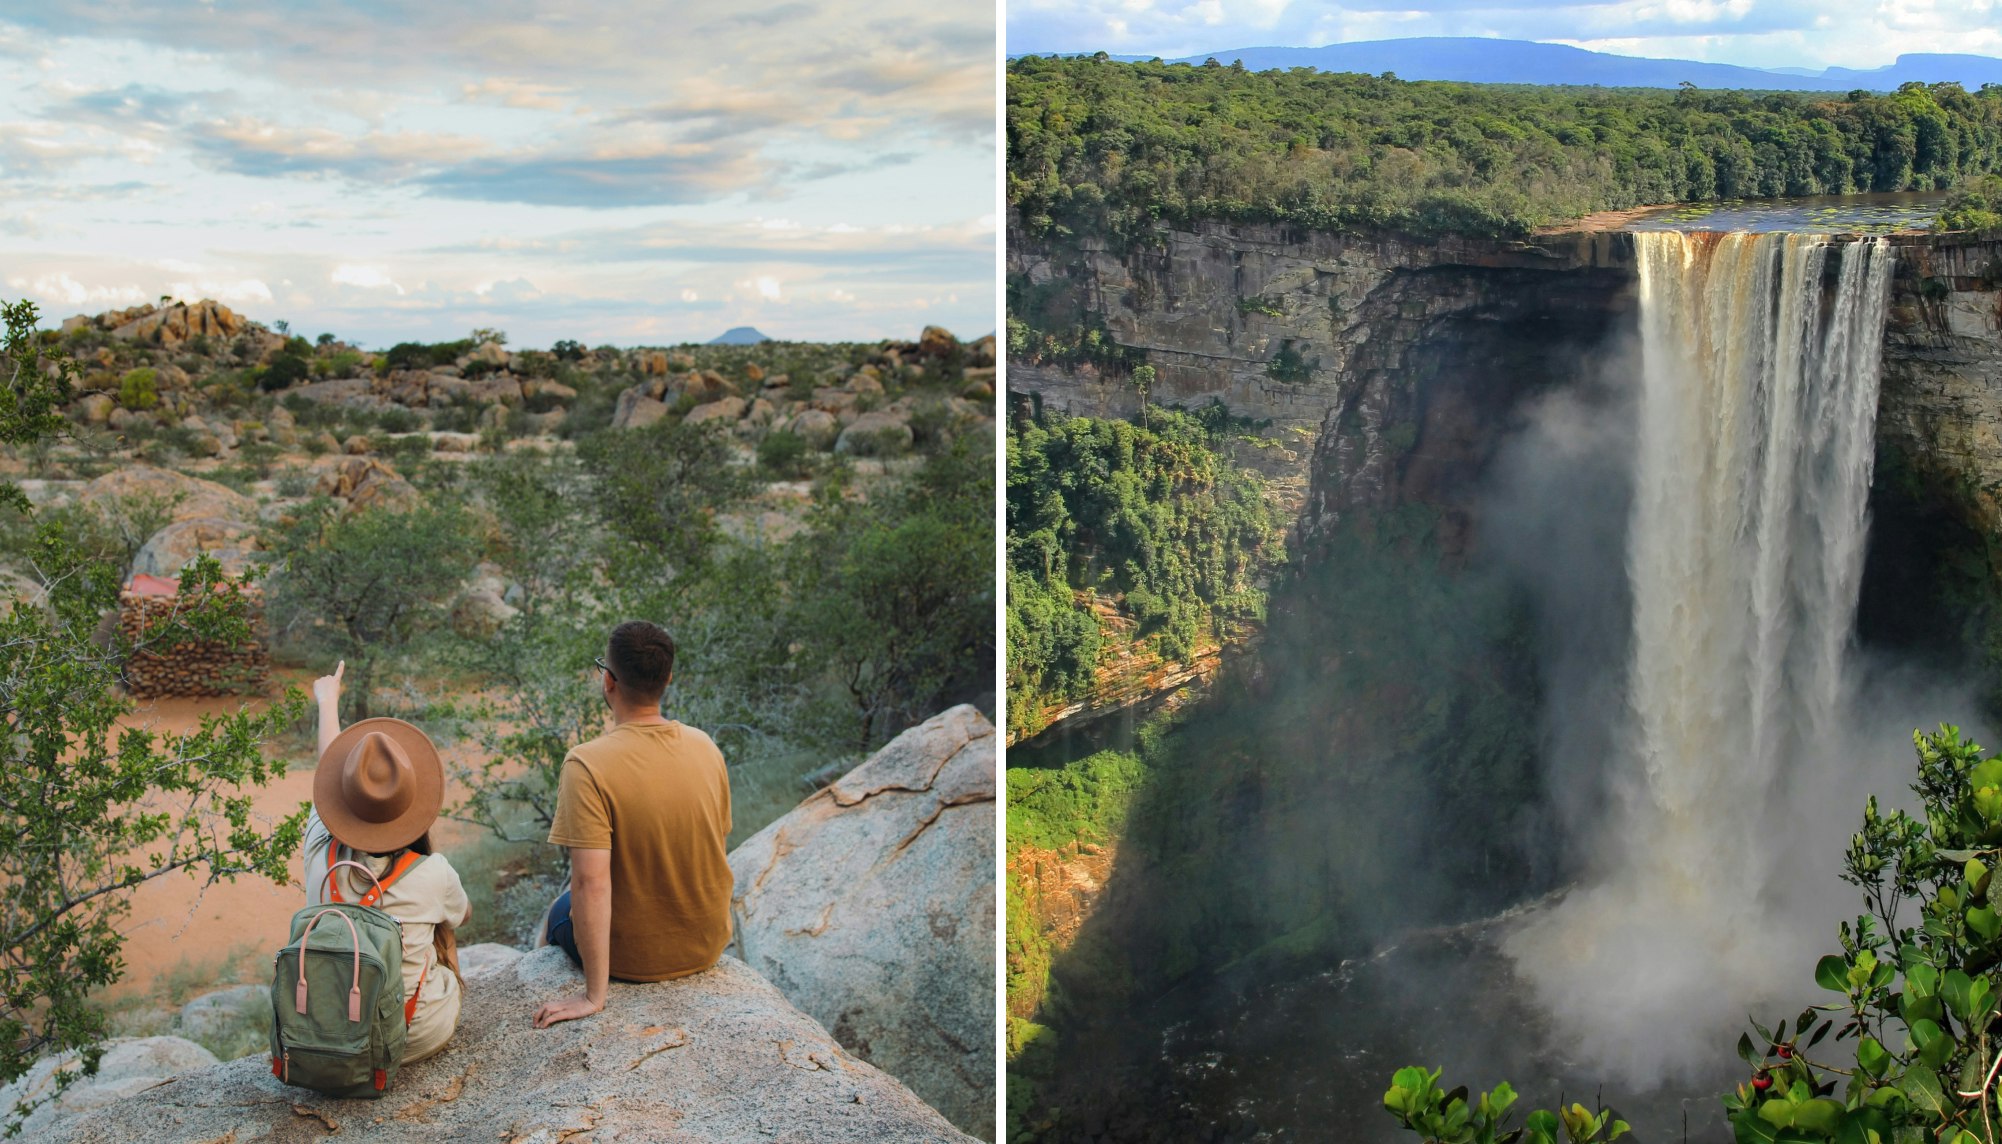 Two travelers look out over the desert; a waterfall in Guyana.